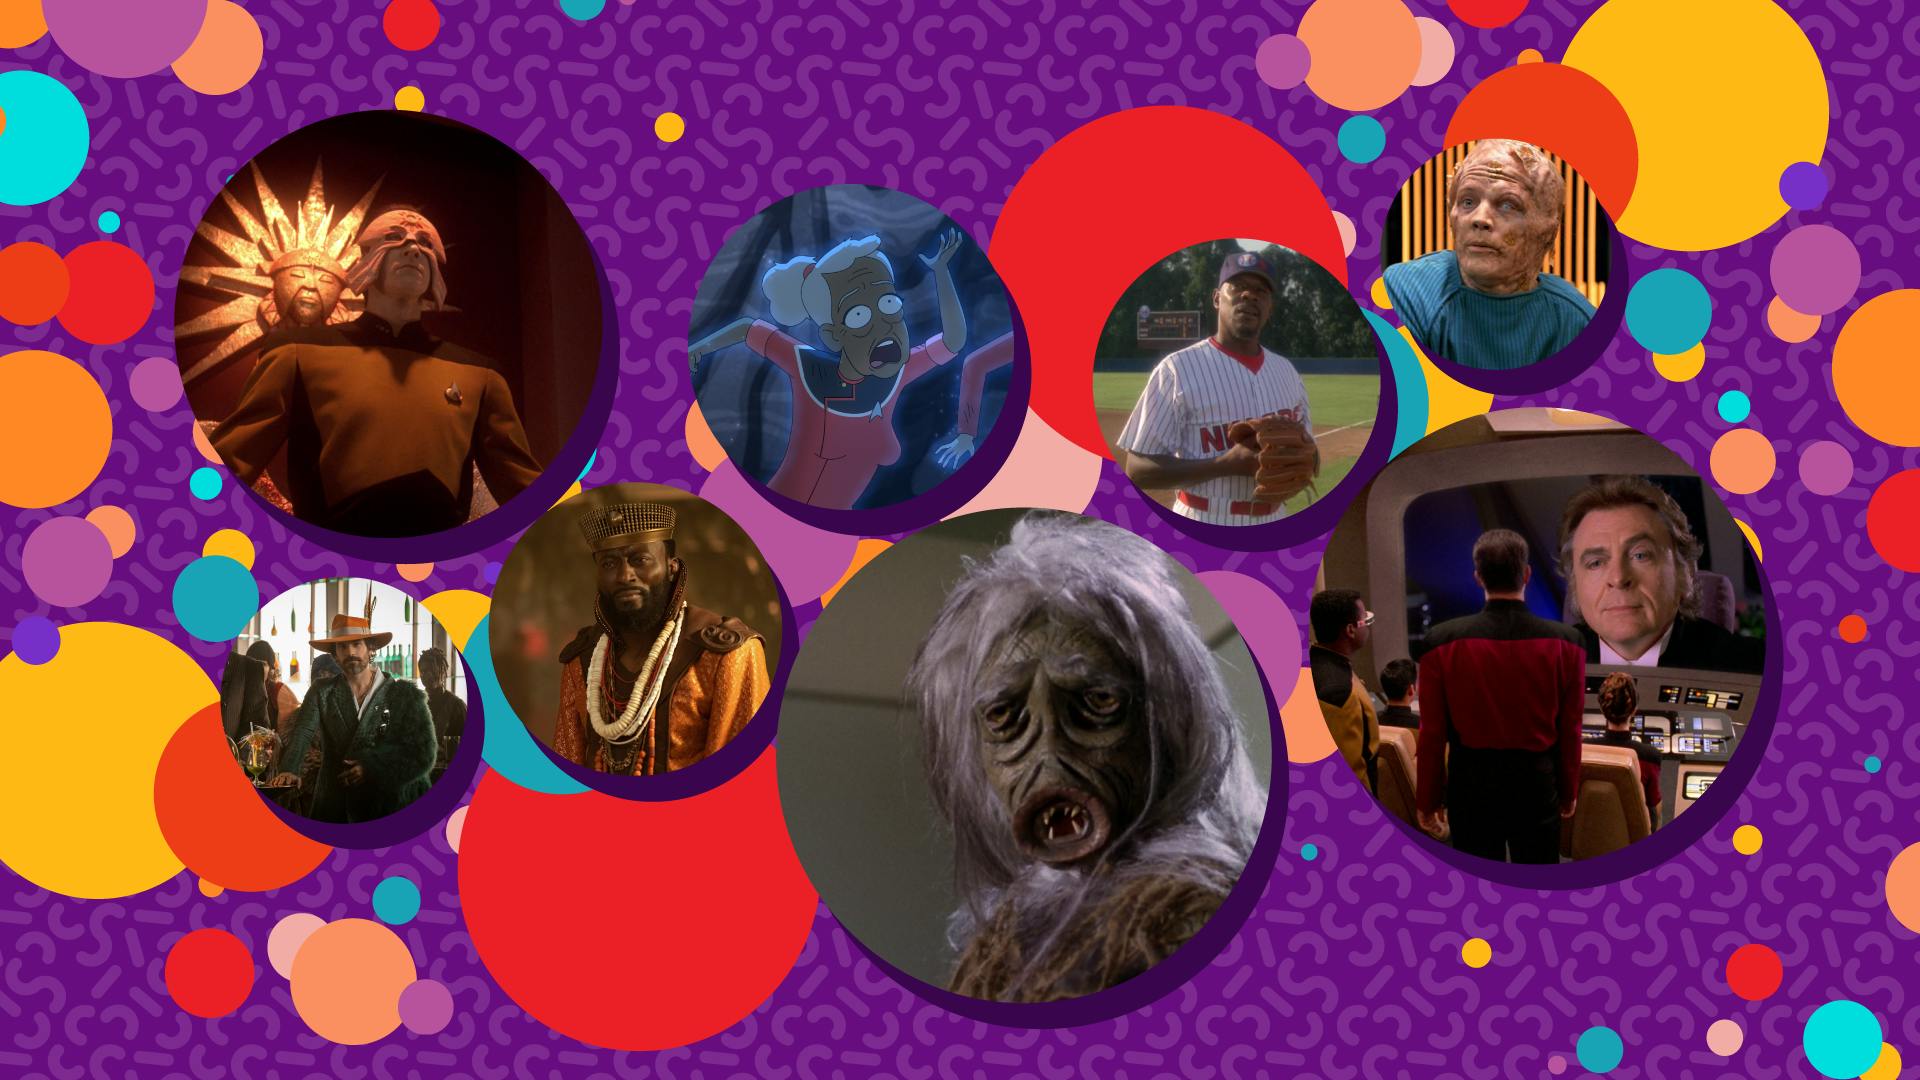 Combination of illustrated circles of varying sizes like confetti and episodic stills including the Salt Vampire, Sisko in his Niners baseball uniform, Moriarty on the Enterprise viewscreen, an aging Mariner as she crosses a barrier in a cave, Data wearing the mask of an ancient civilization, Cristobal's disguise which requires a large hat with a feather, and Dr. M'Benga transported into the regal Elysian Kingdom